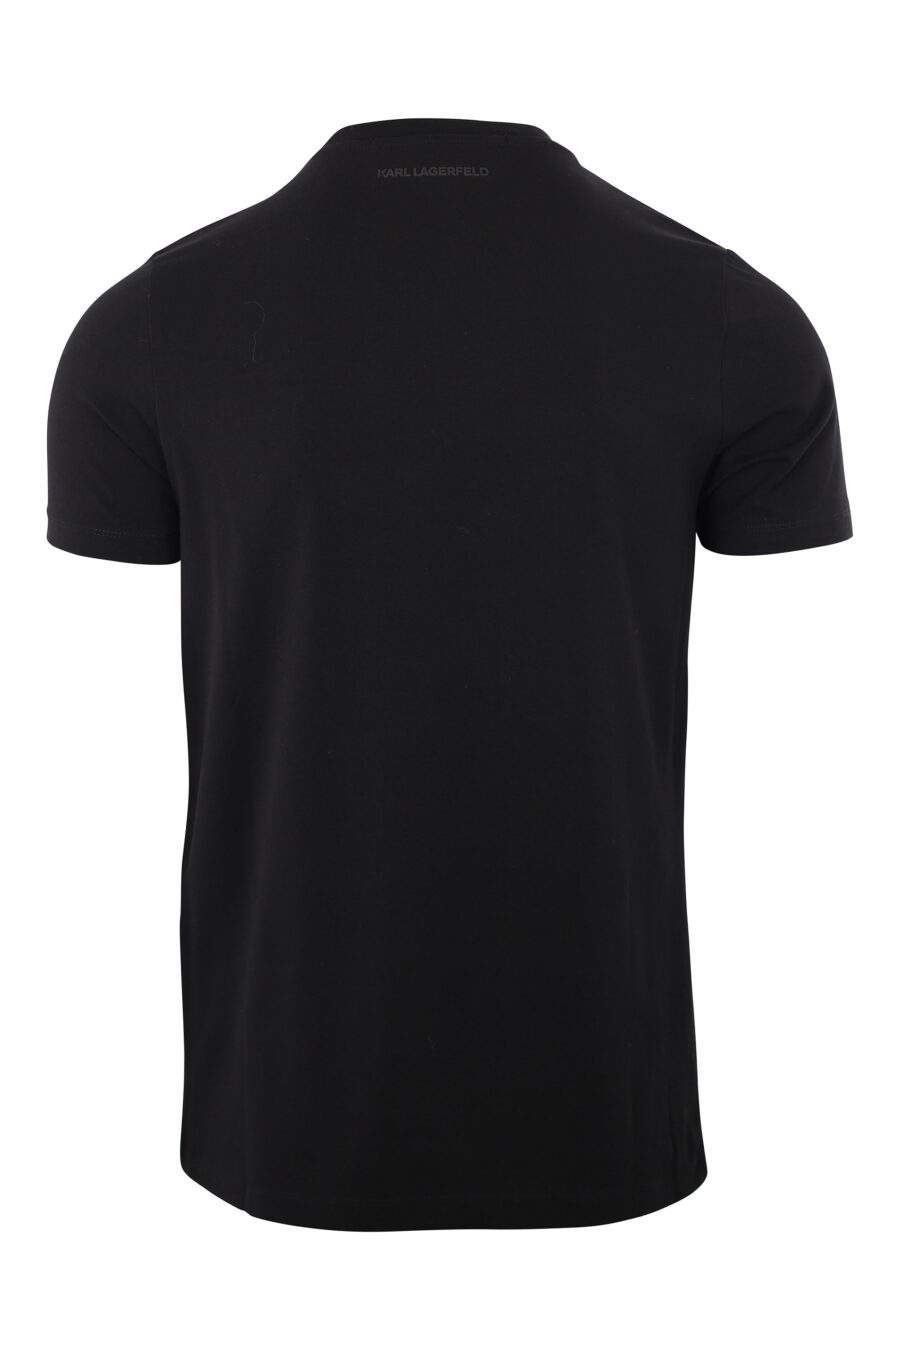 Black T-shirt with gold silhouette logo - IMG 1981